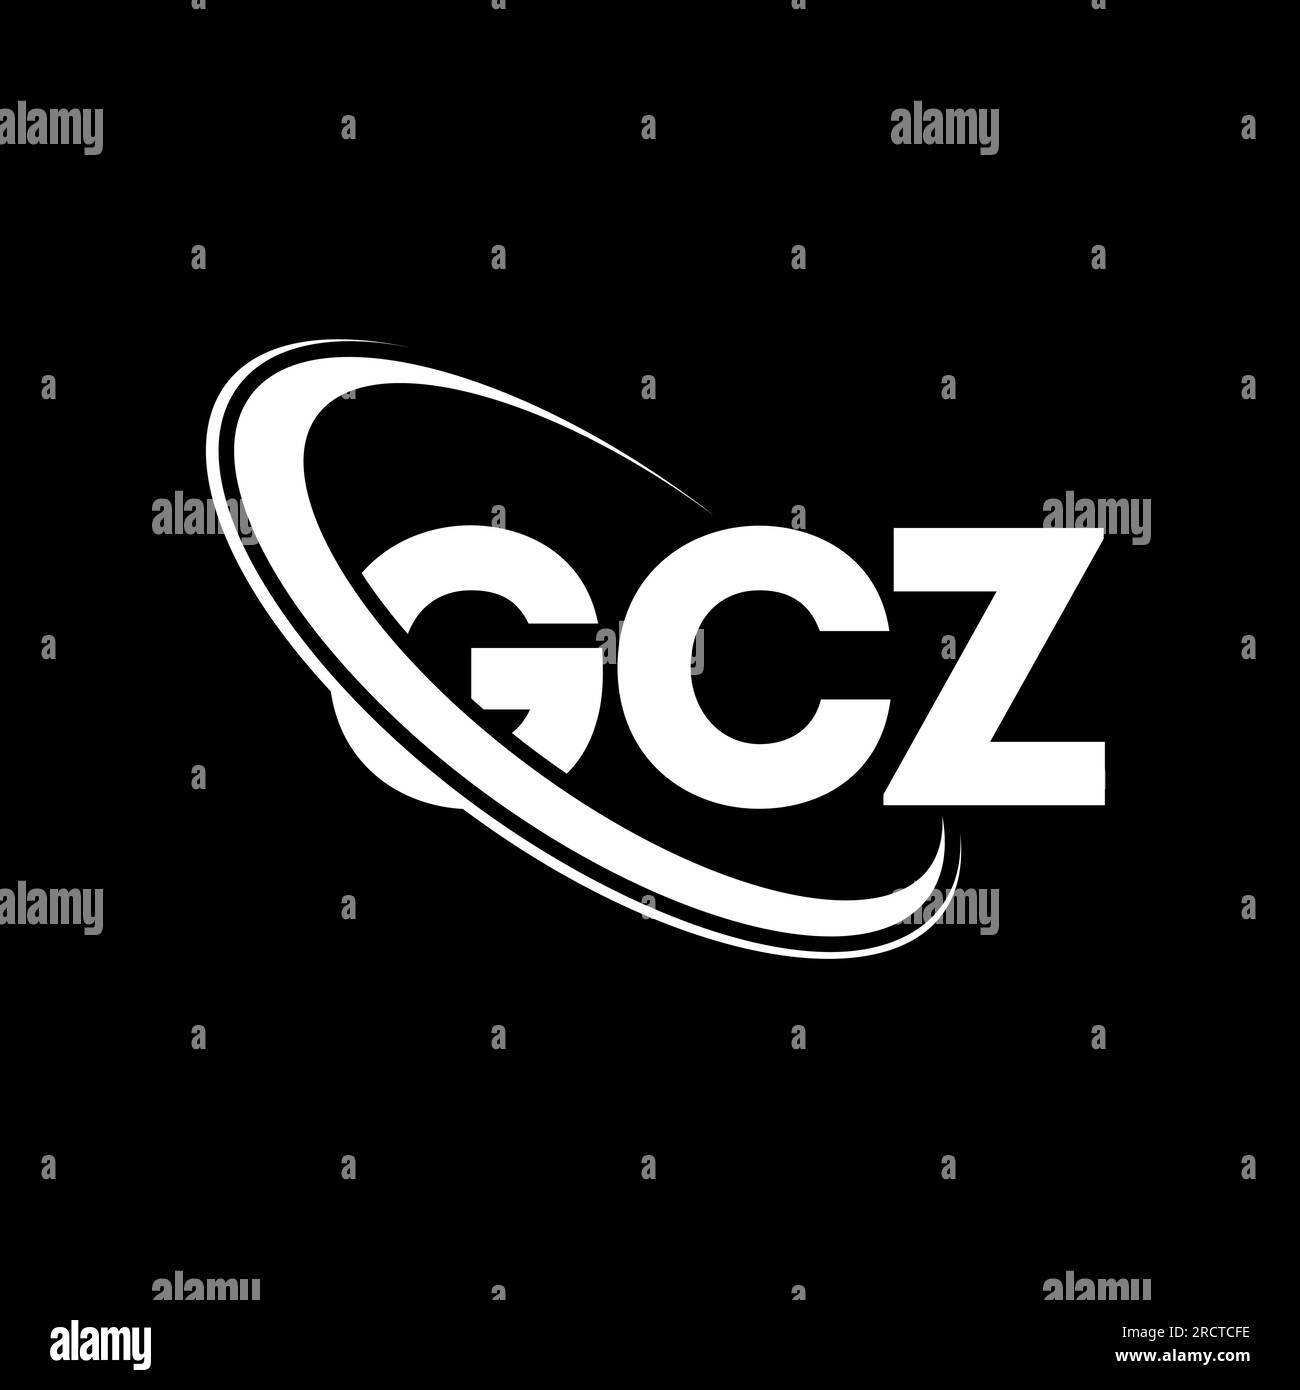 GCZ logo. GCZ letter. GCZ letter logo design. Initials GCZ logo linked with circle and uppercase monogram logo. GCZ typography for technology, busines Stock Vector